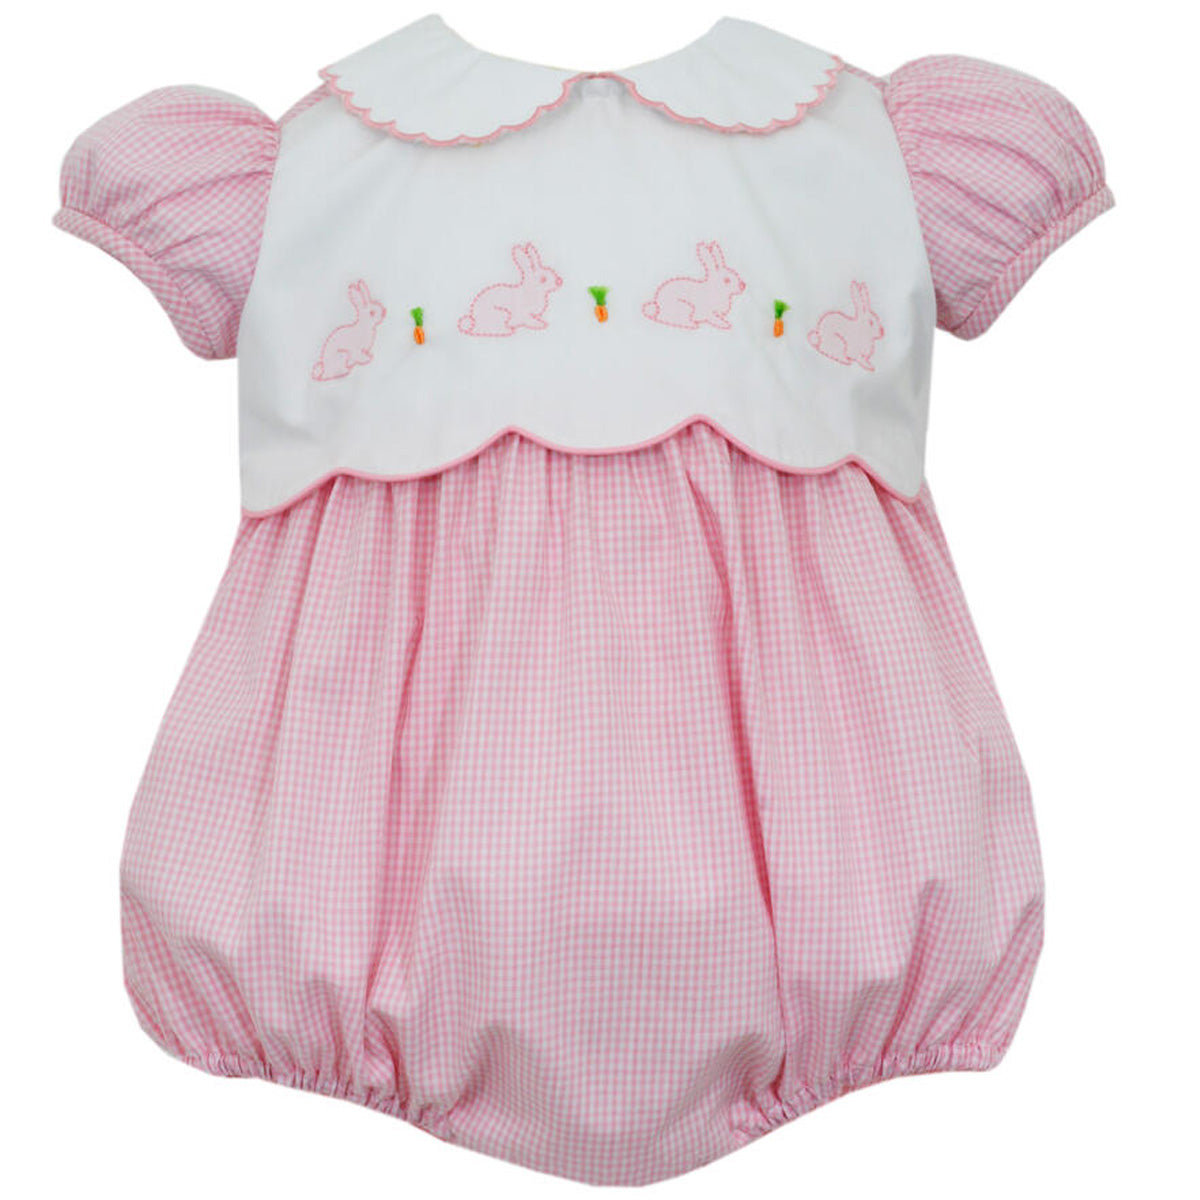 Bunnies Pink Gingham Bubble w/ White Bodice